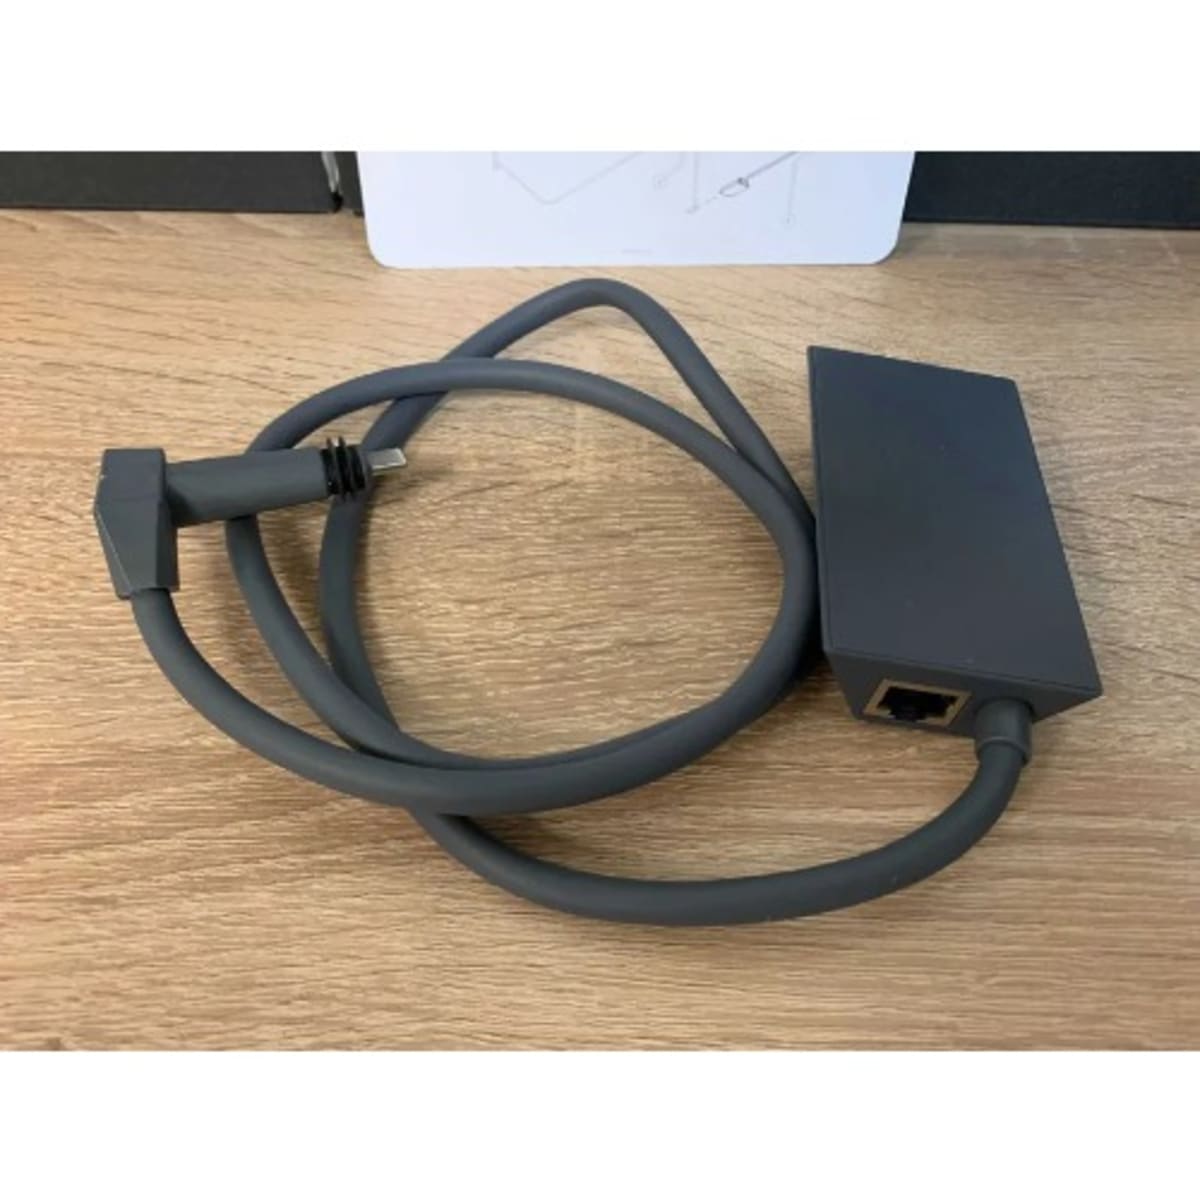 Starlink Ethernet Adapter For Wired External Network